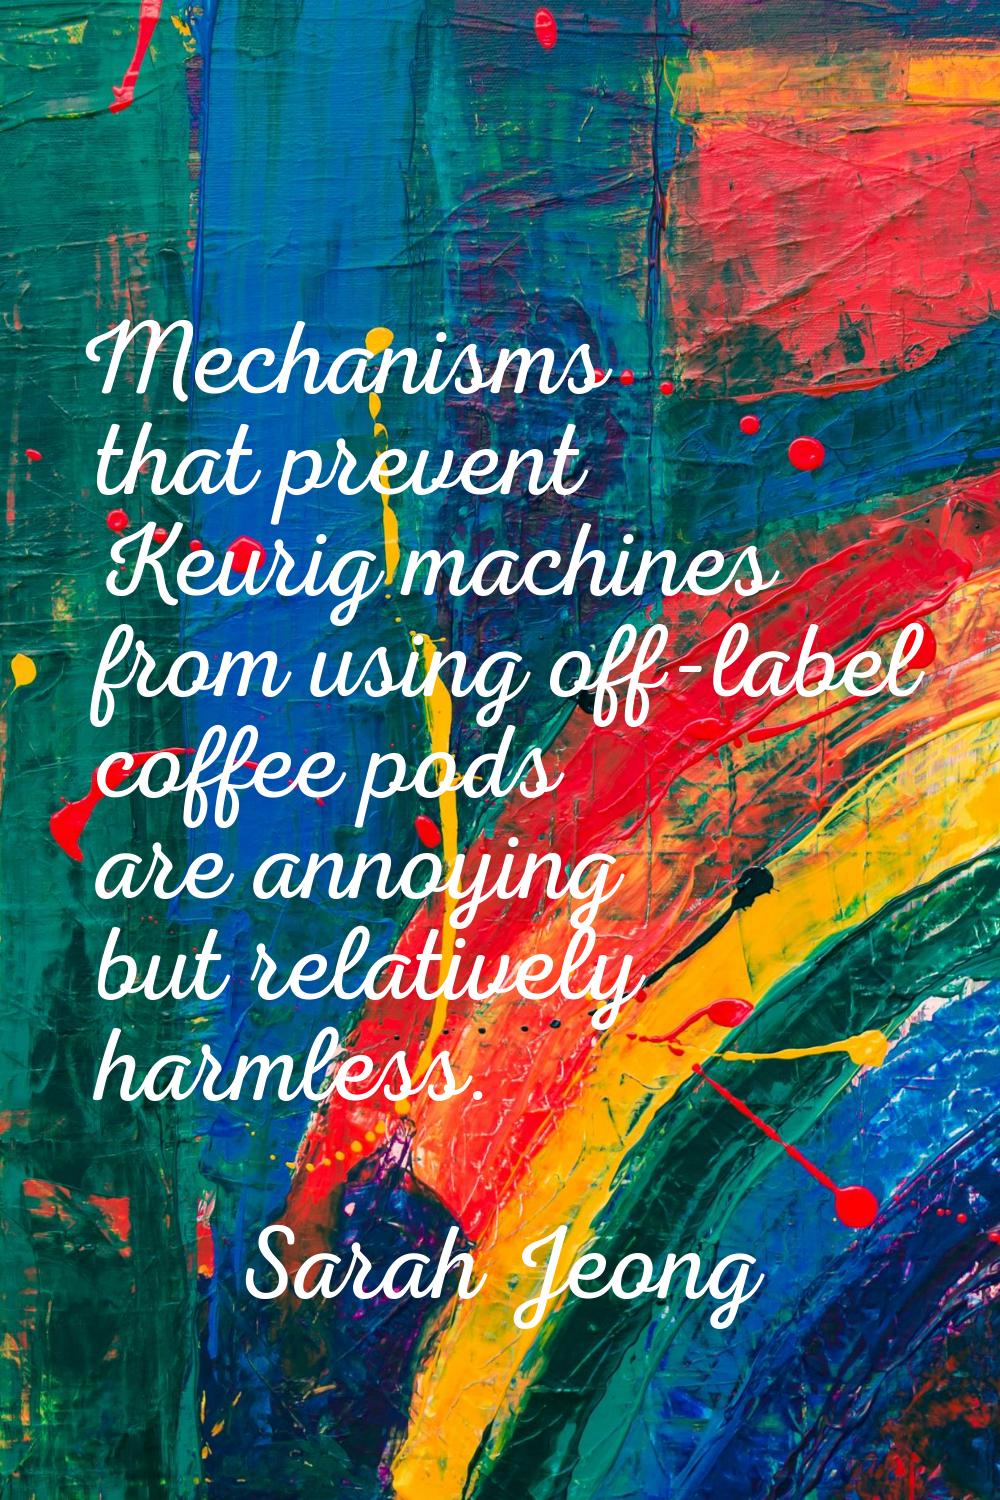 Mechanisms that prevent Keurig machines from using off-label coffee pods are annoying but relativel